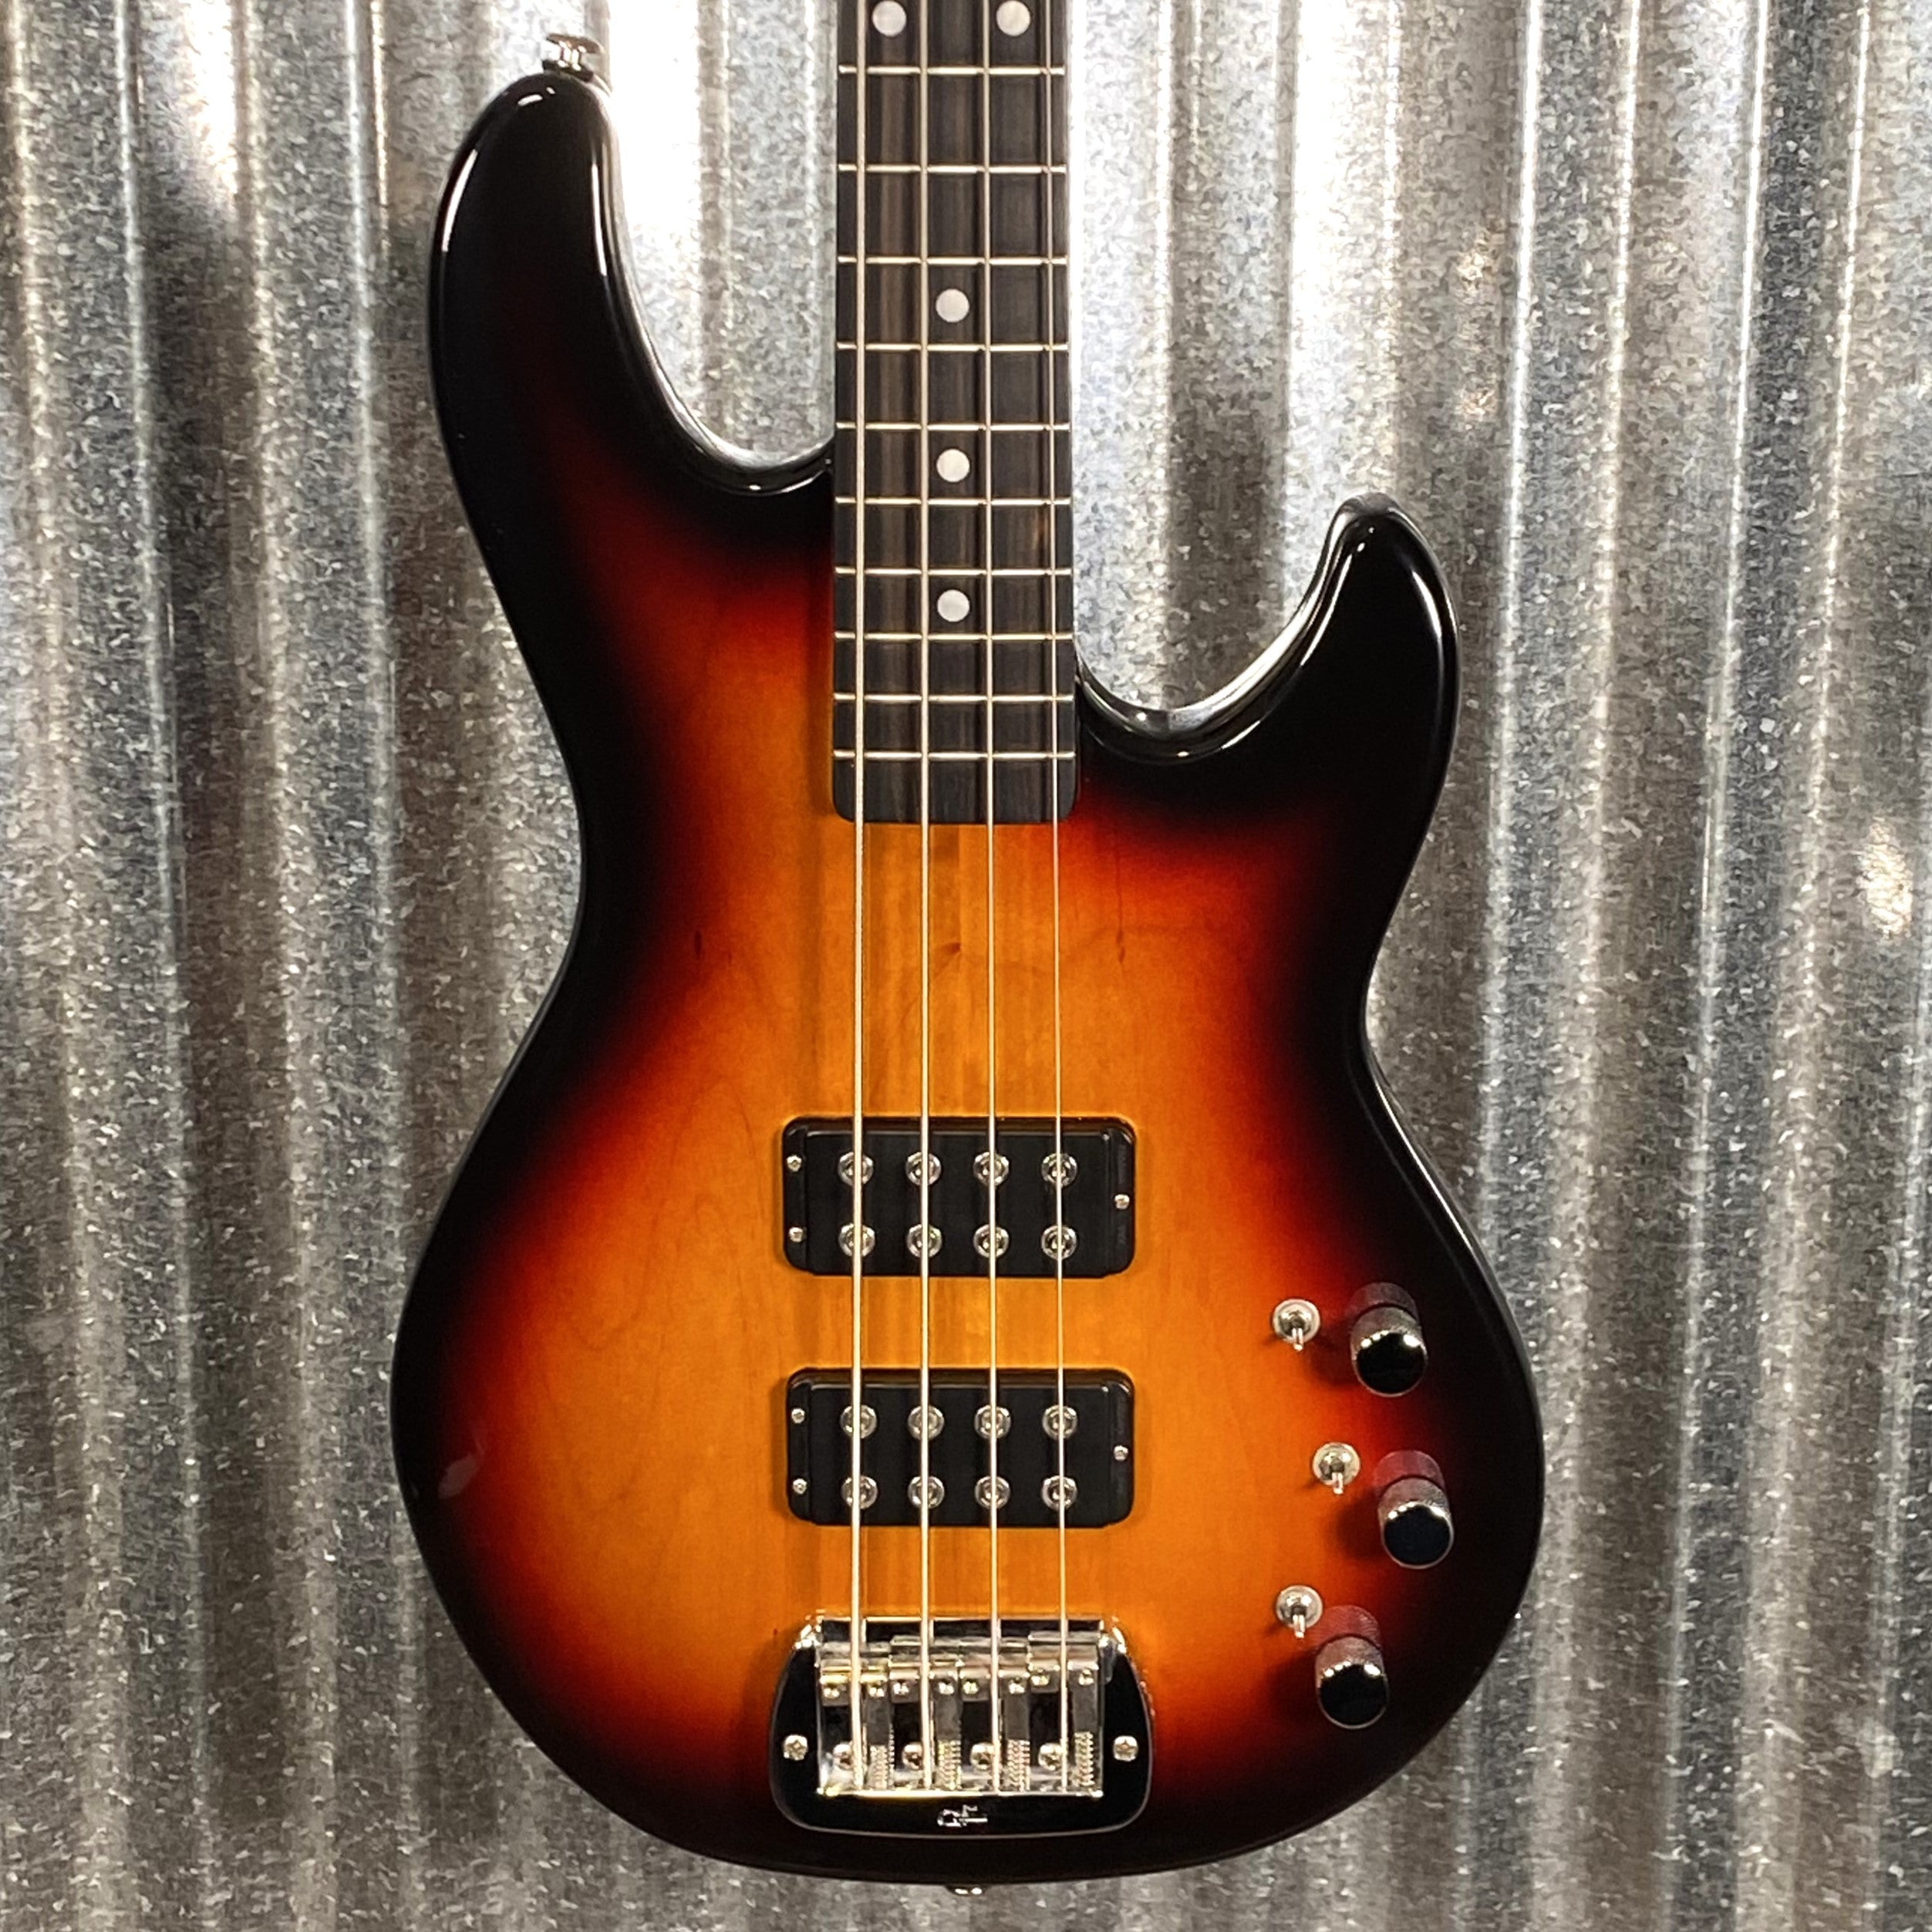 G&L Sold Basses – Specialty Traders